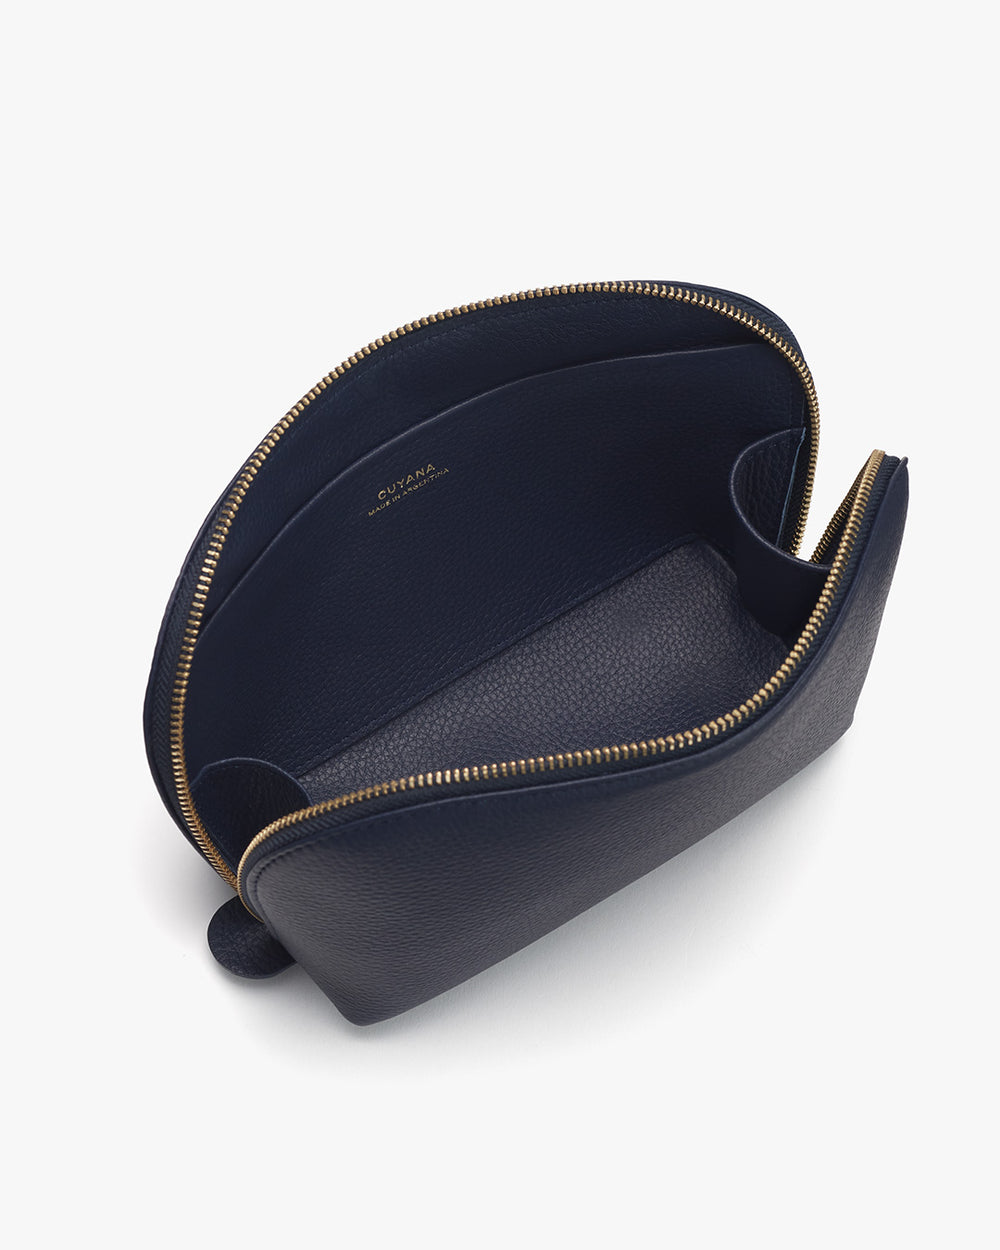 Open navy blue clutch bag with gold zipper on white background.